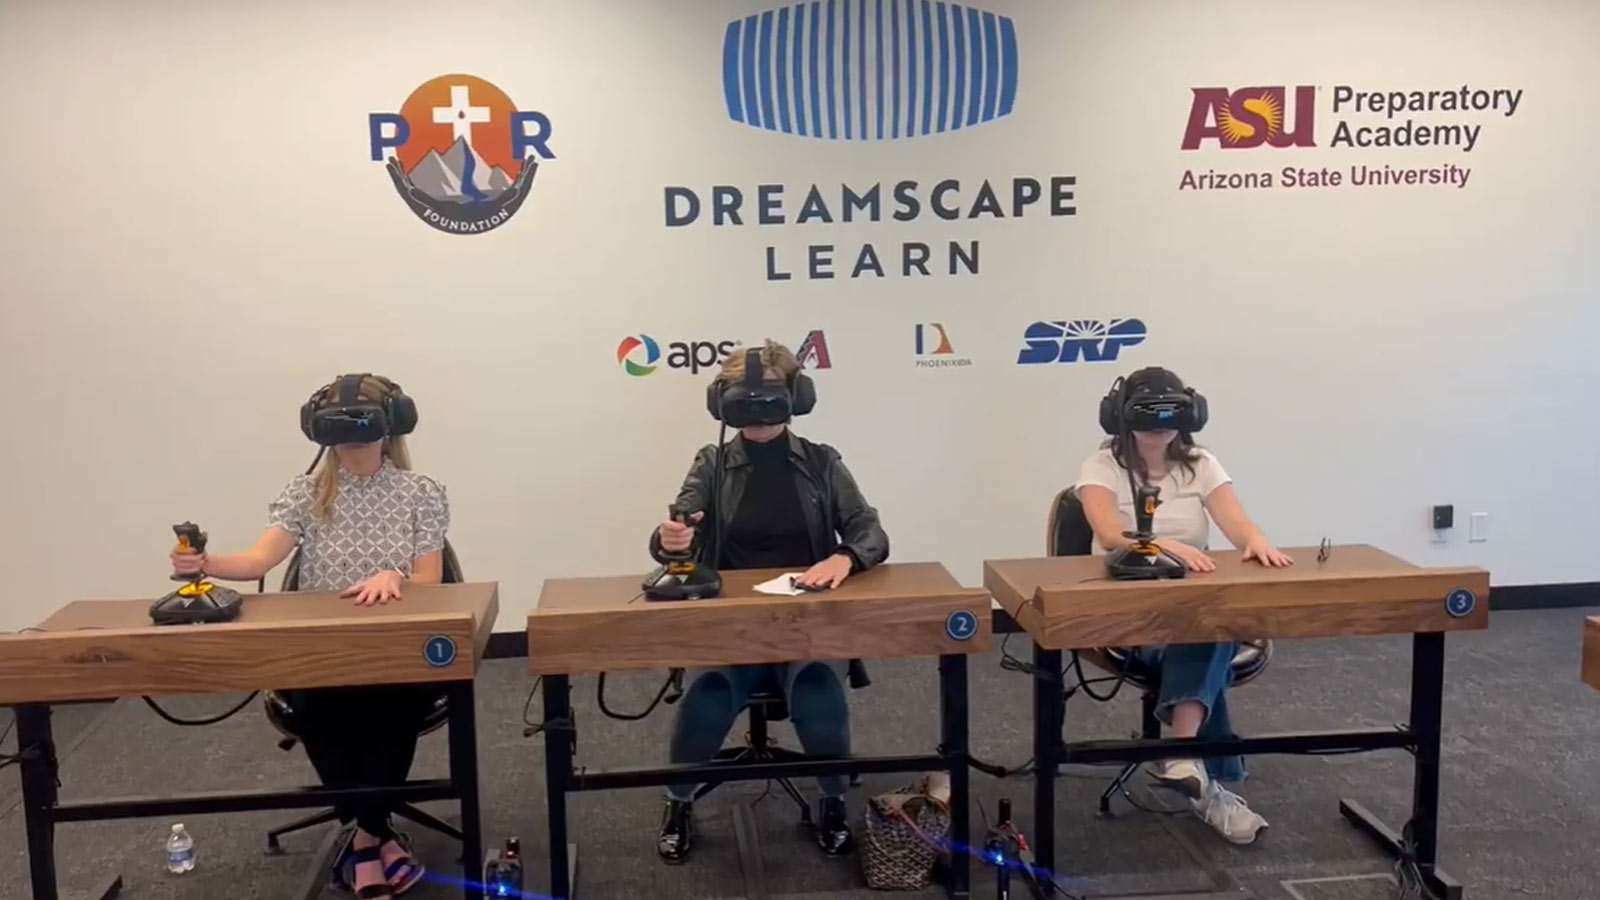 Students wear virtual reality headsets in the Dreamscape Learn pod at ASU Prep Pilgrim Rest Element...